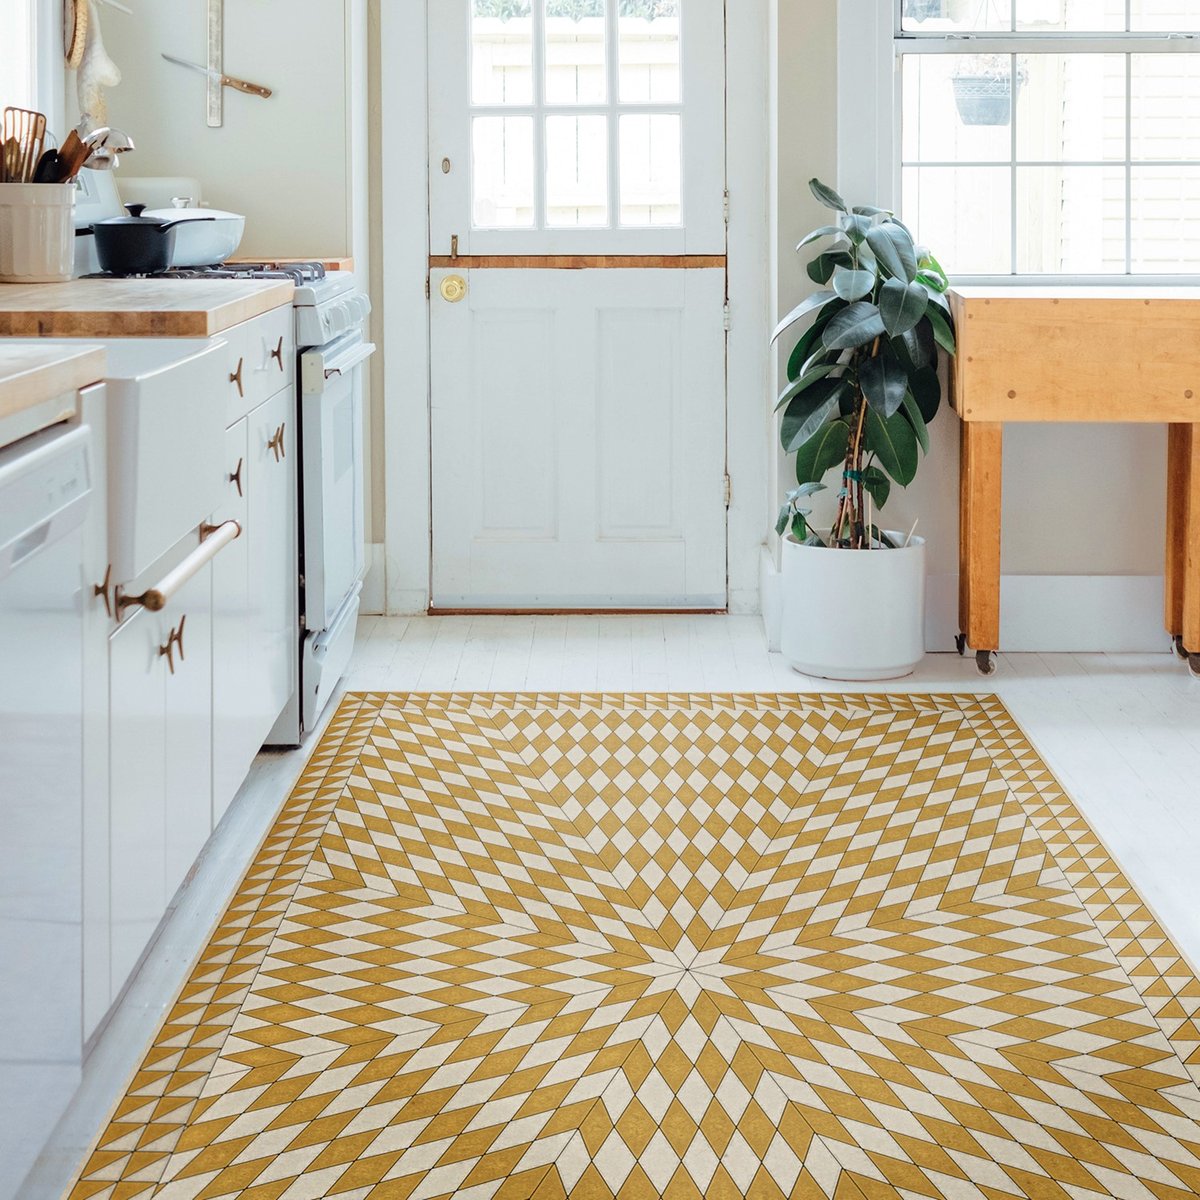 Mid-Century Retro vibes with kitchen rugs